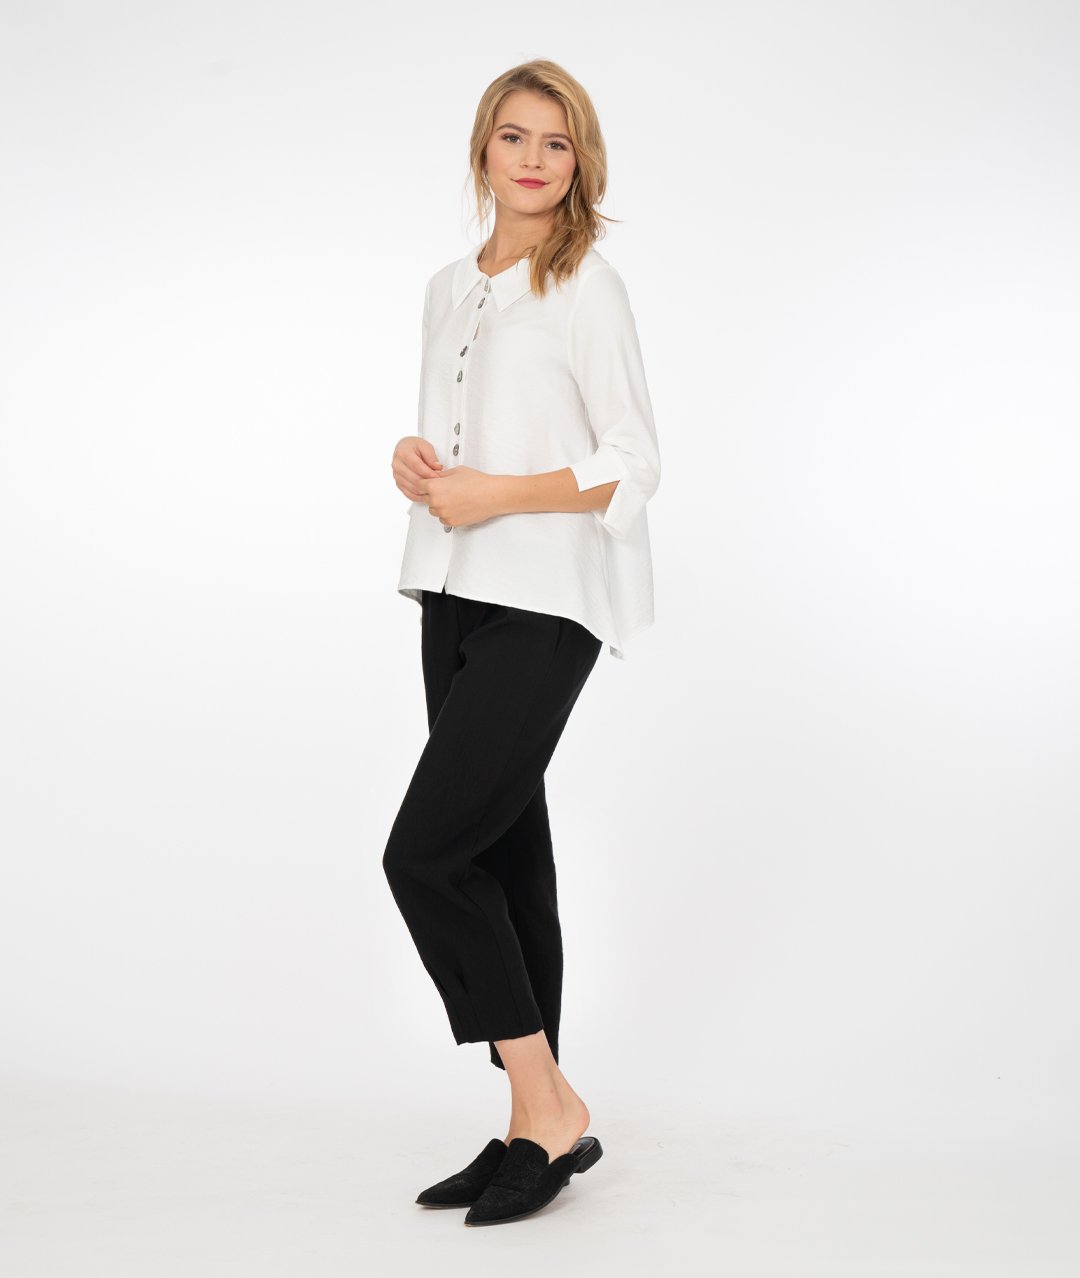 model in a white button up jacket with a collar and splits at the cuffs of the sleeves. Wearing black pants and shoes, standing in front of a white background